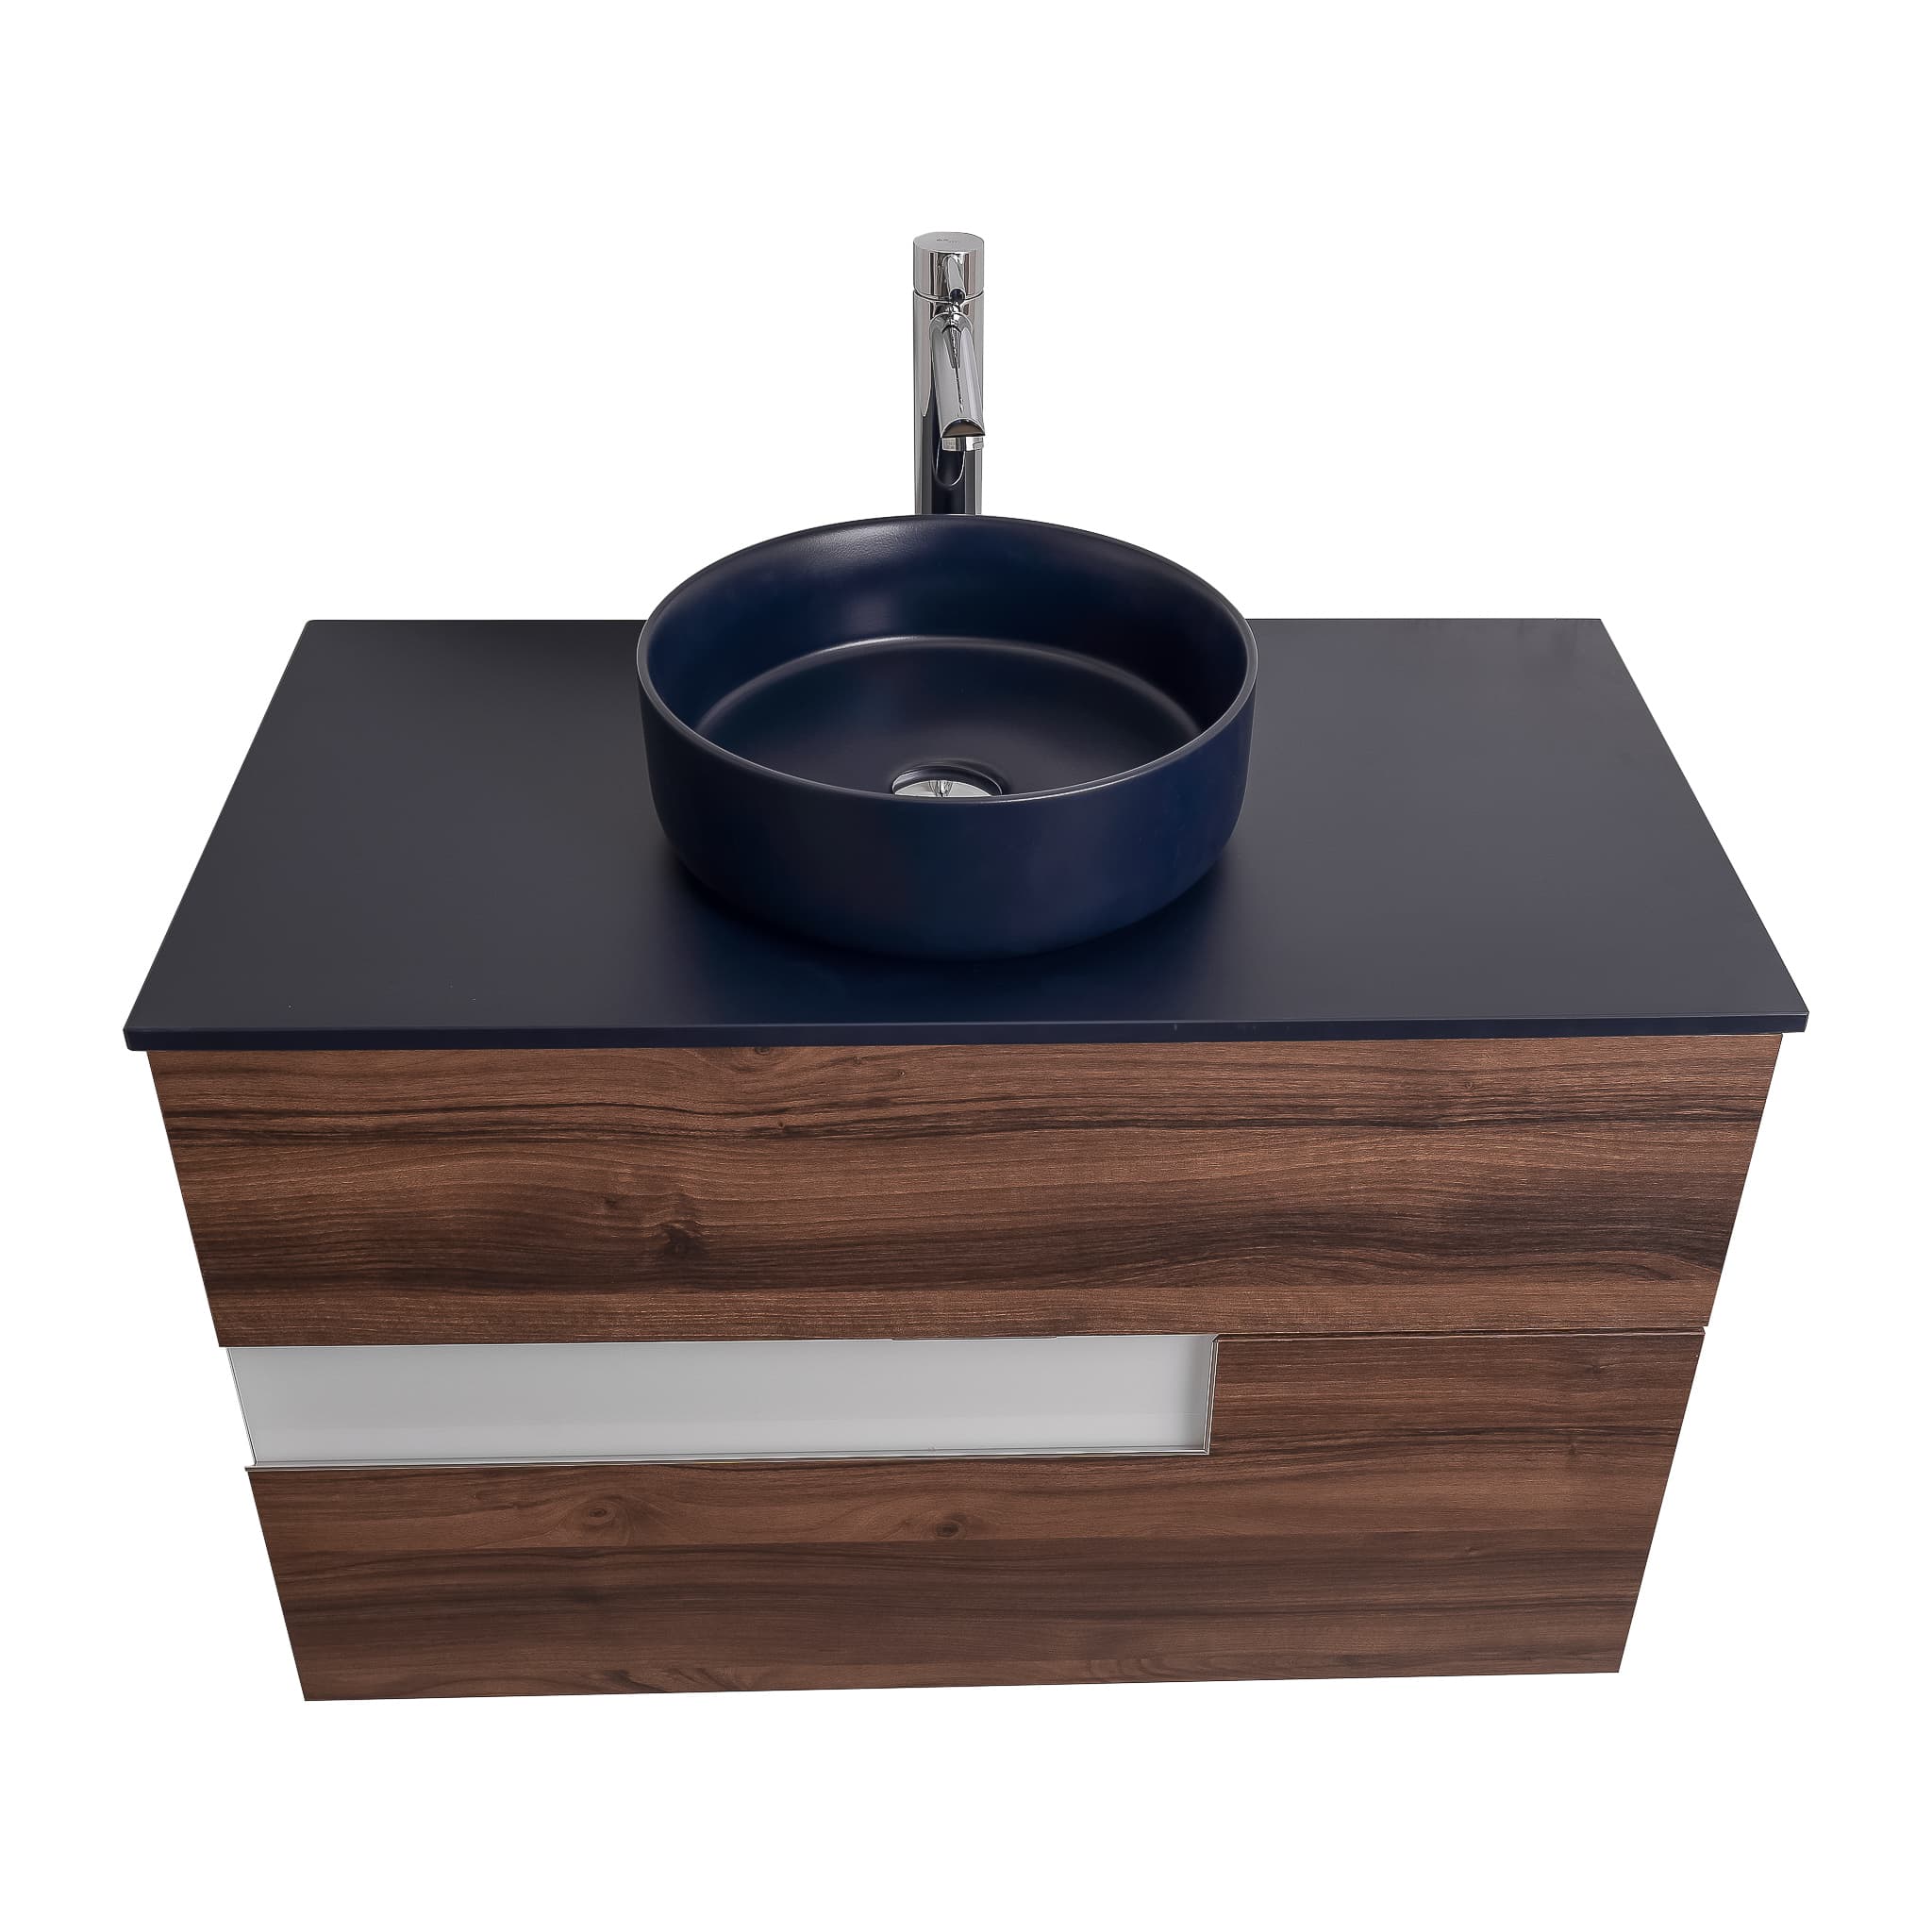 Vision 31.5 Valenti Medium Brown Wood Cabinet, Ares Navy Blue Top And Ares Navy Blue Ceramic Basin, Wall Mounted Modern Vanity Set